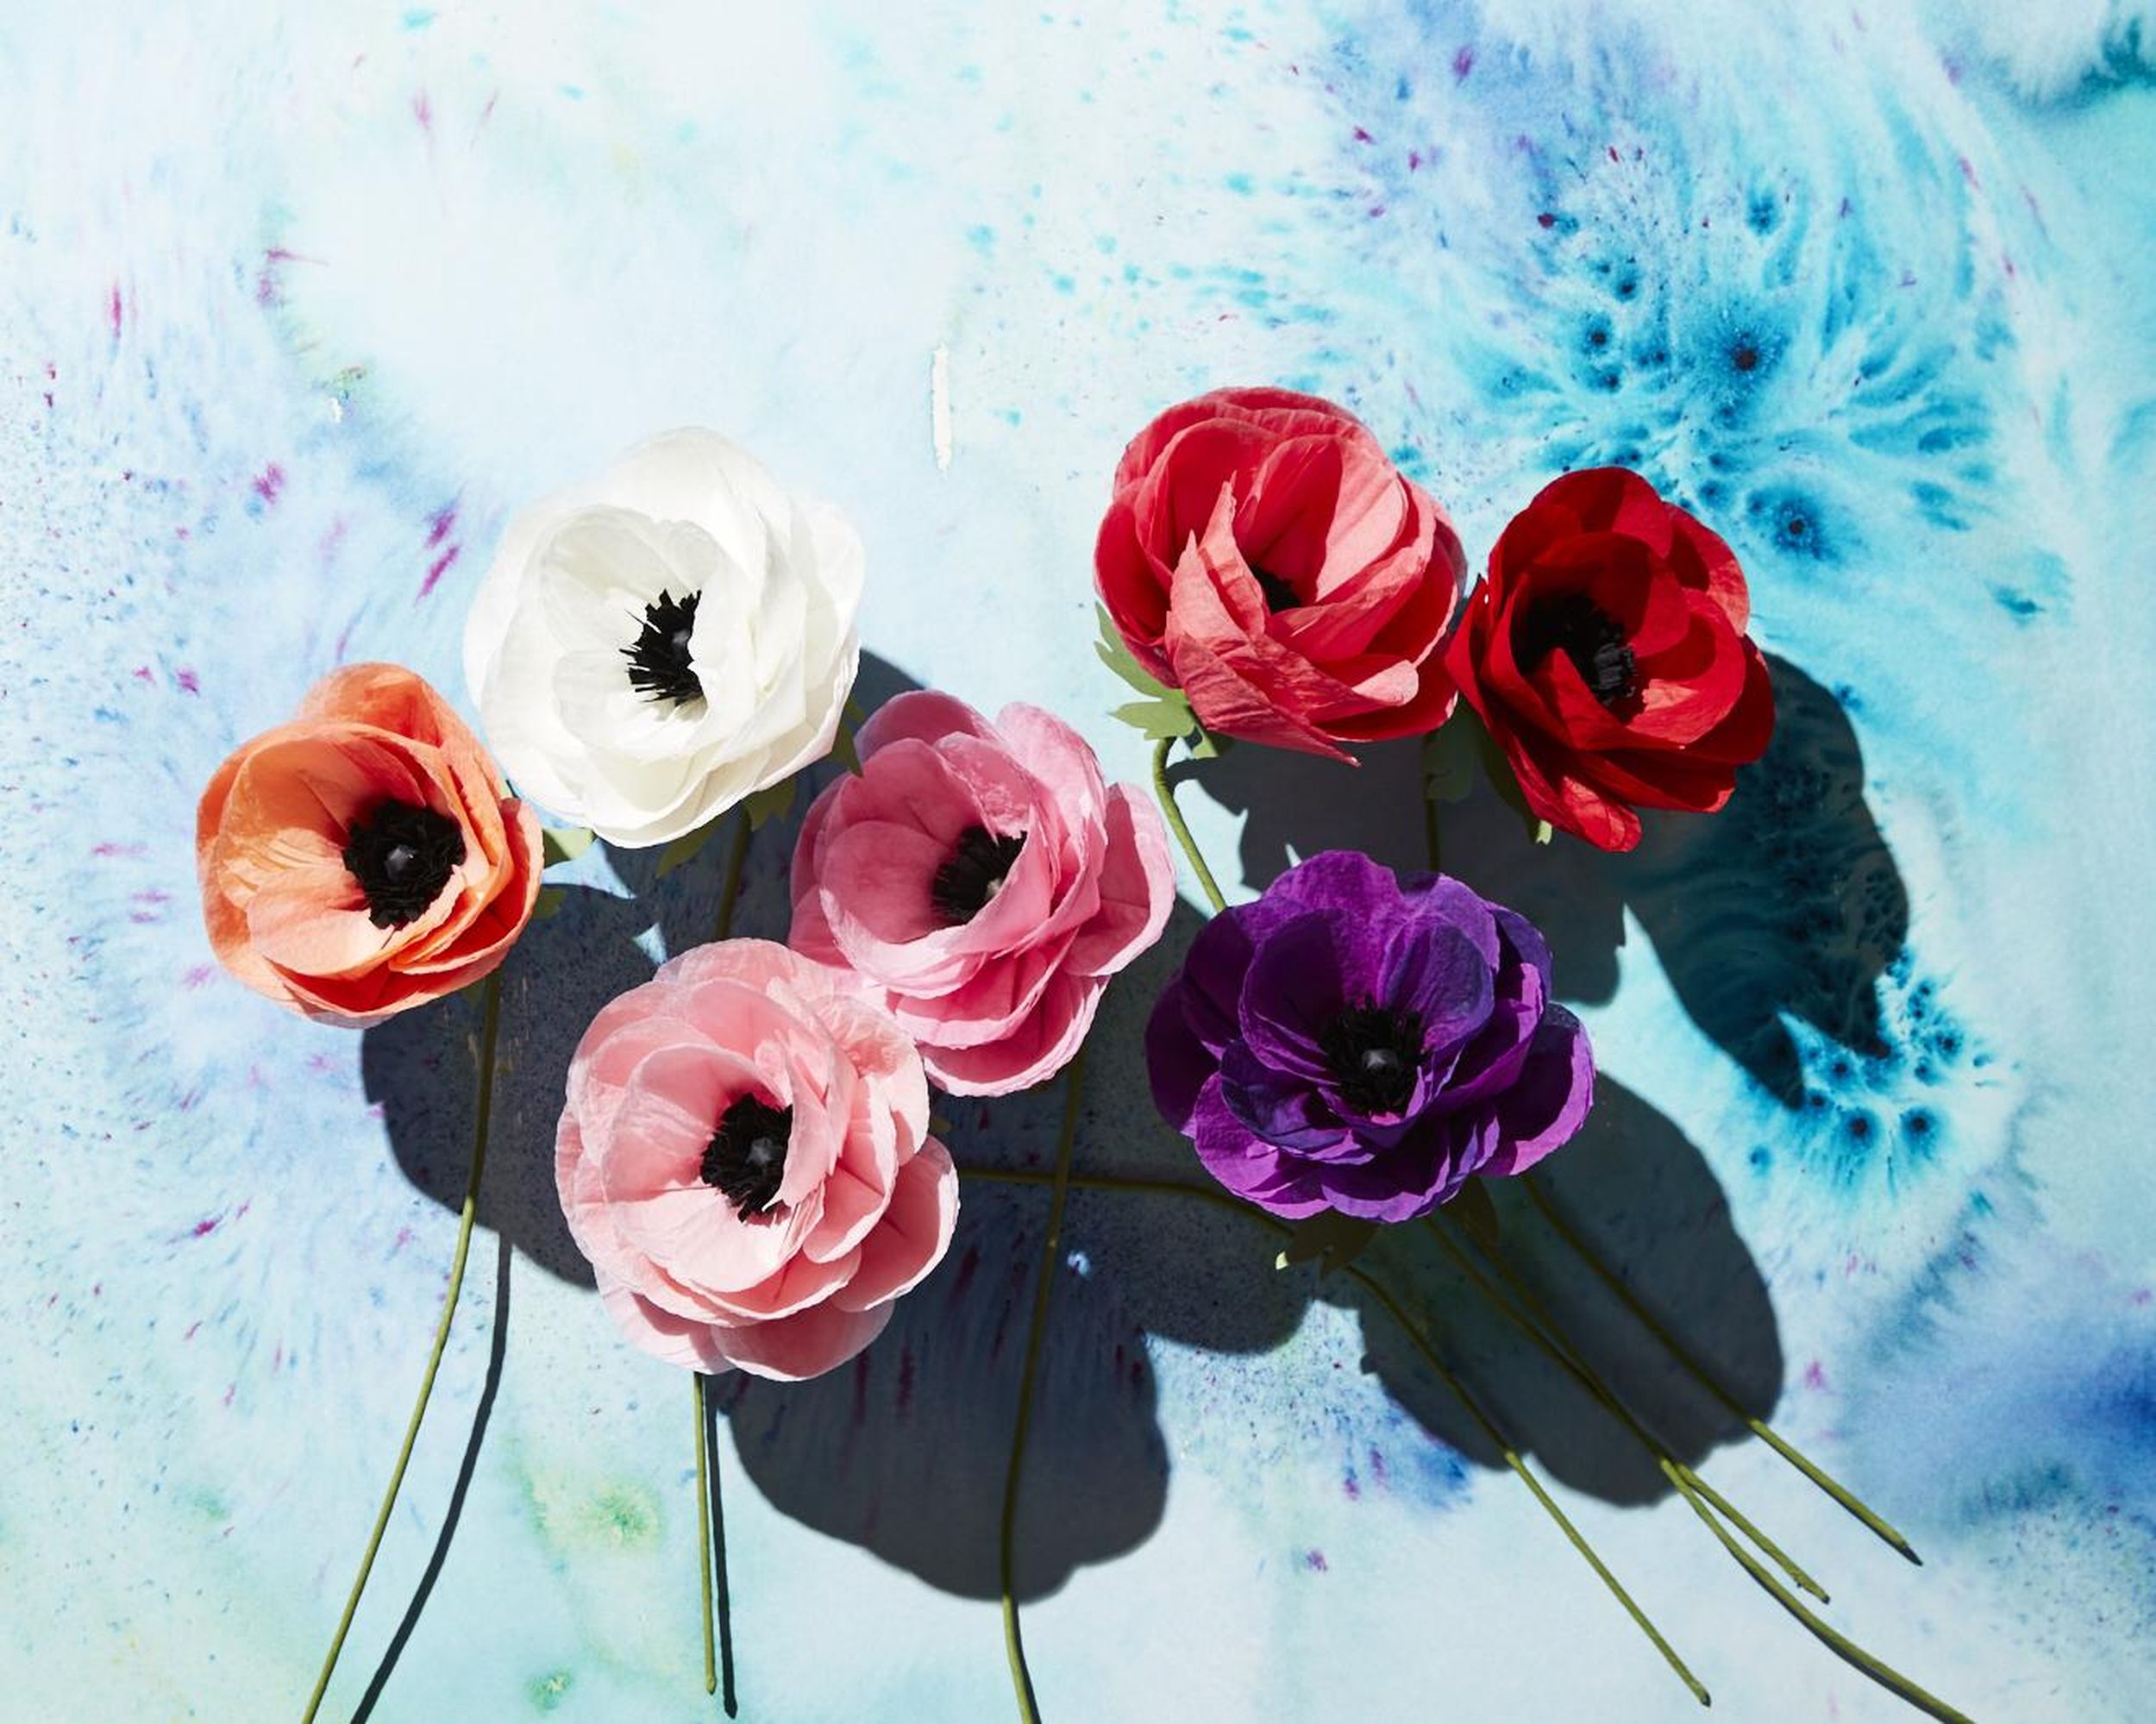 Faux Designers Embrace Fake ﬂowers